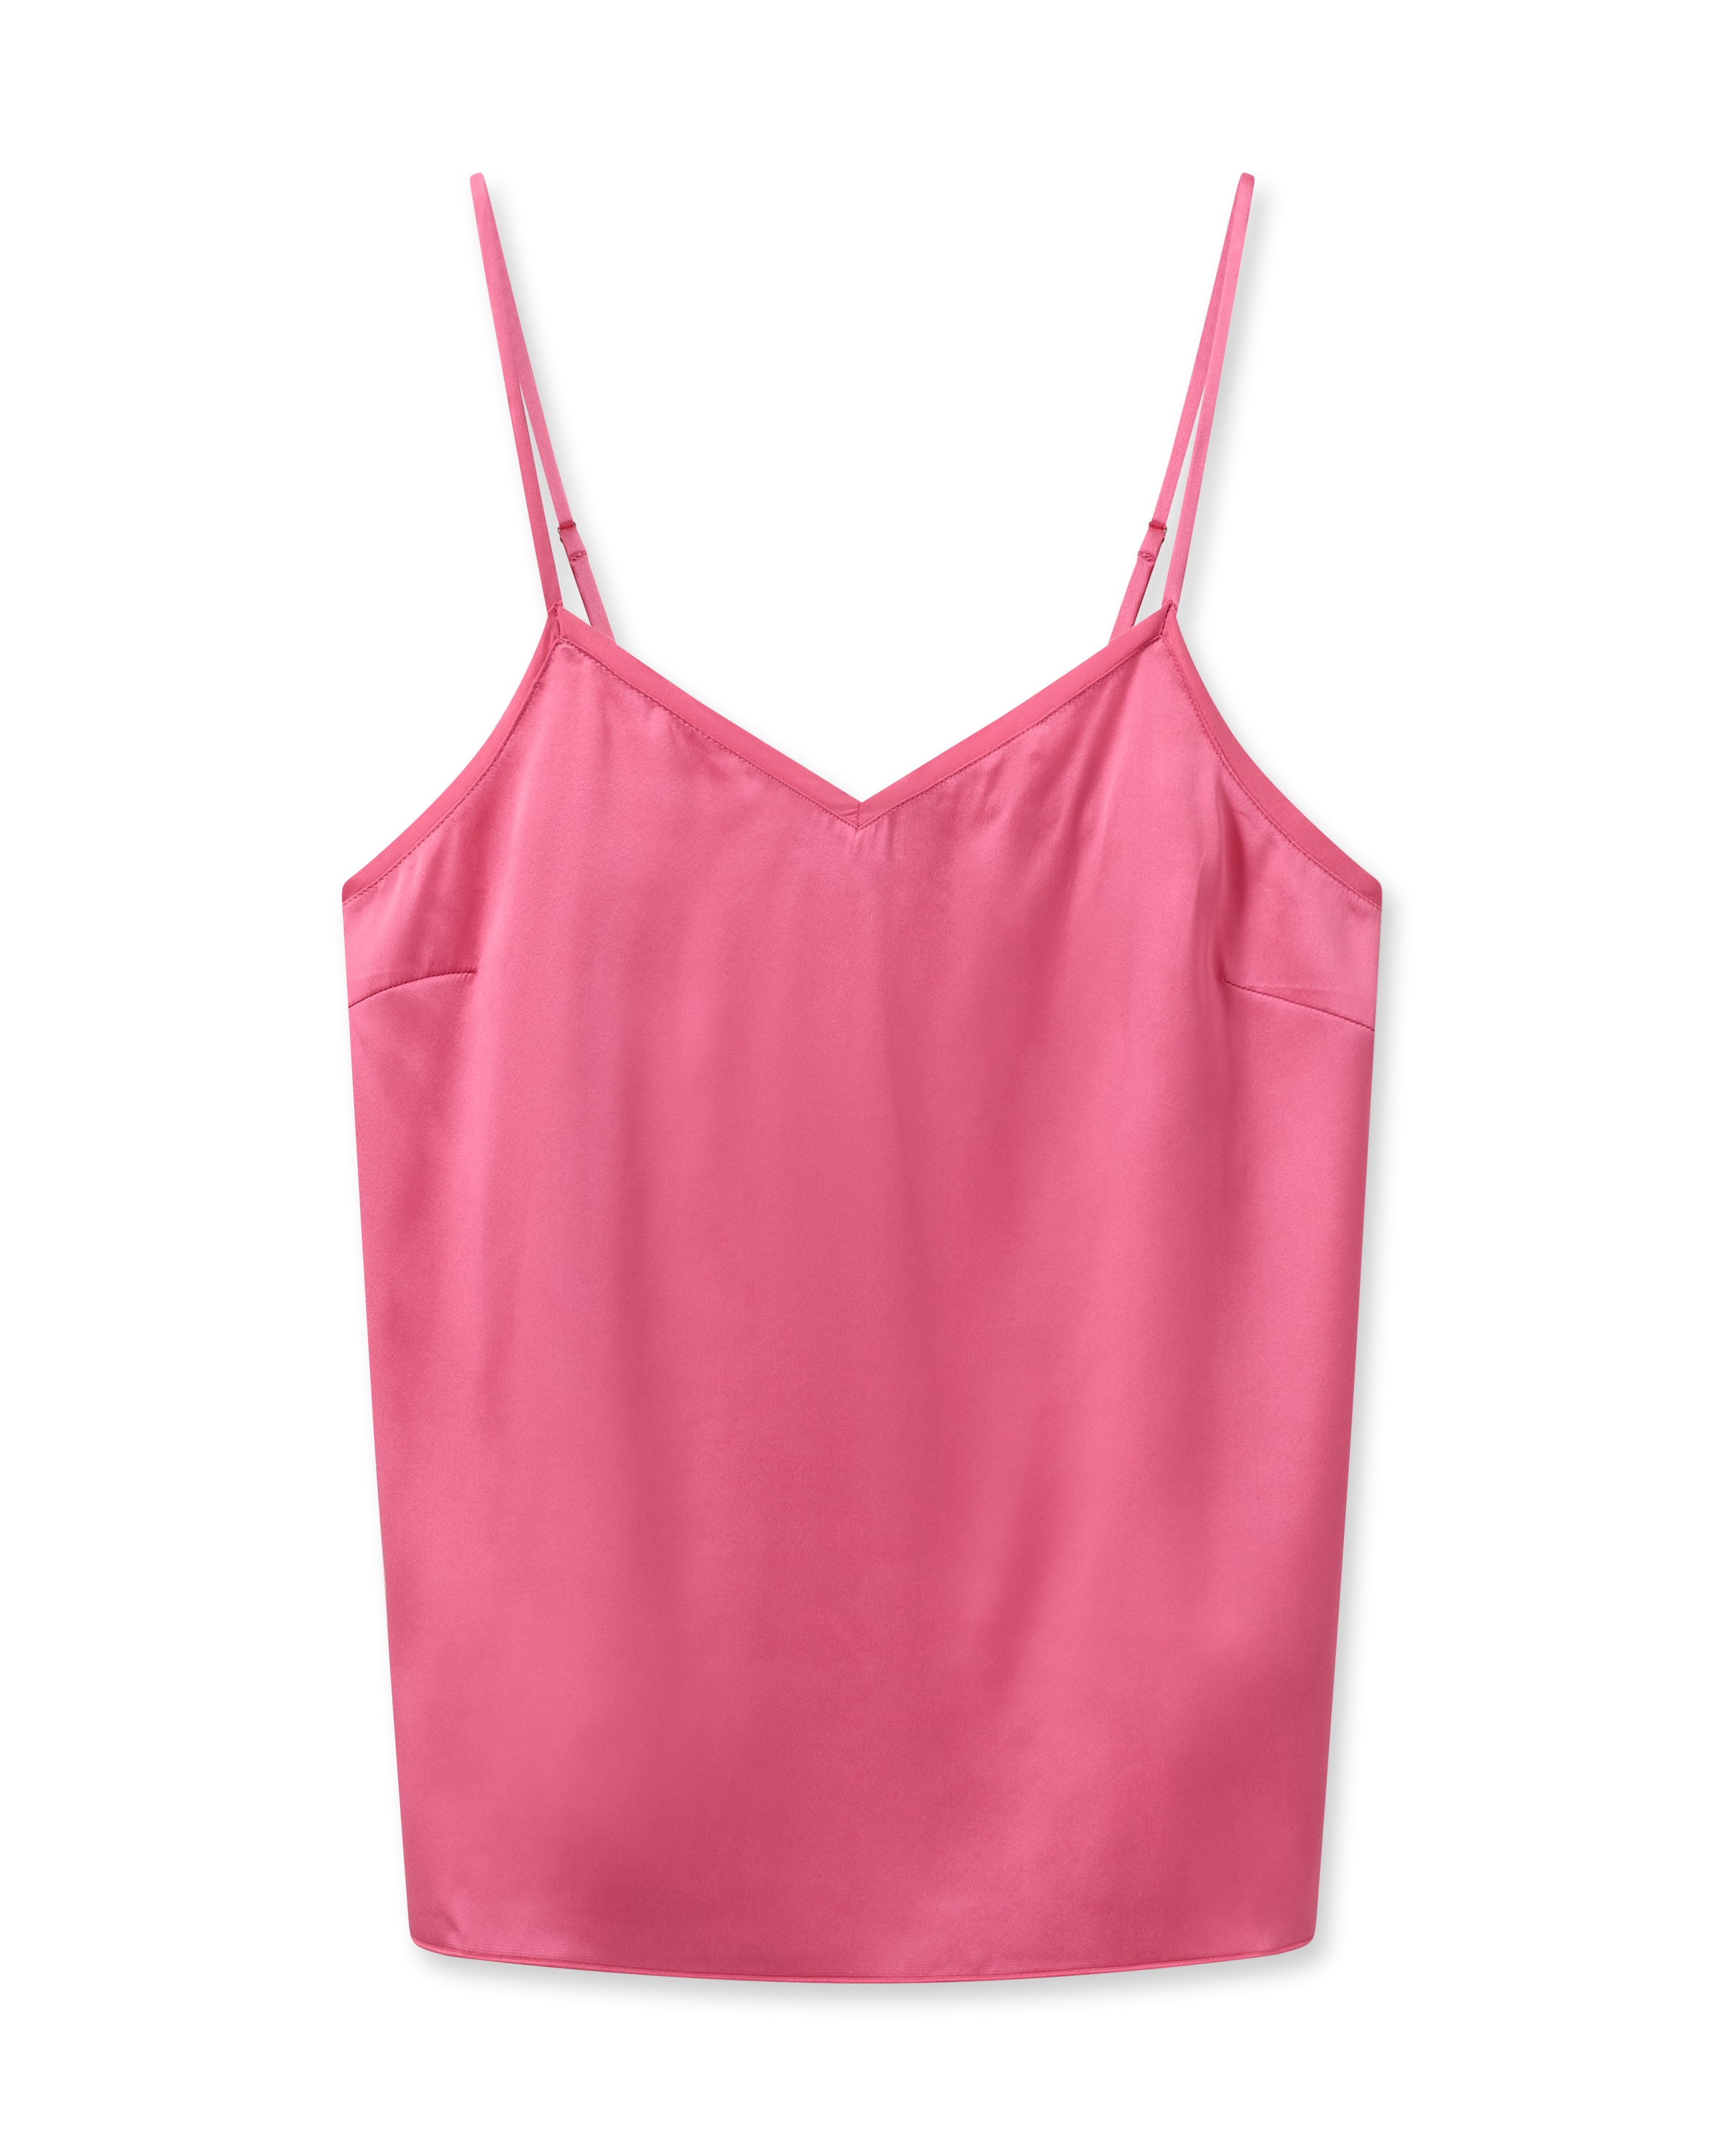 pink silk camisole with spaghetti straps and a V neck